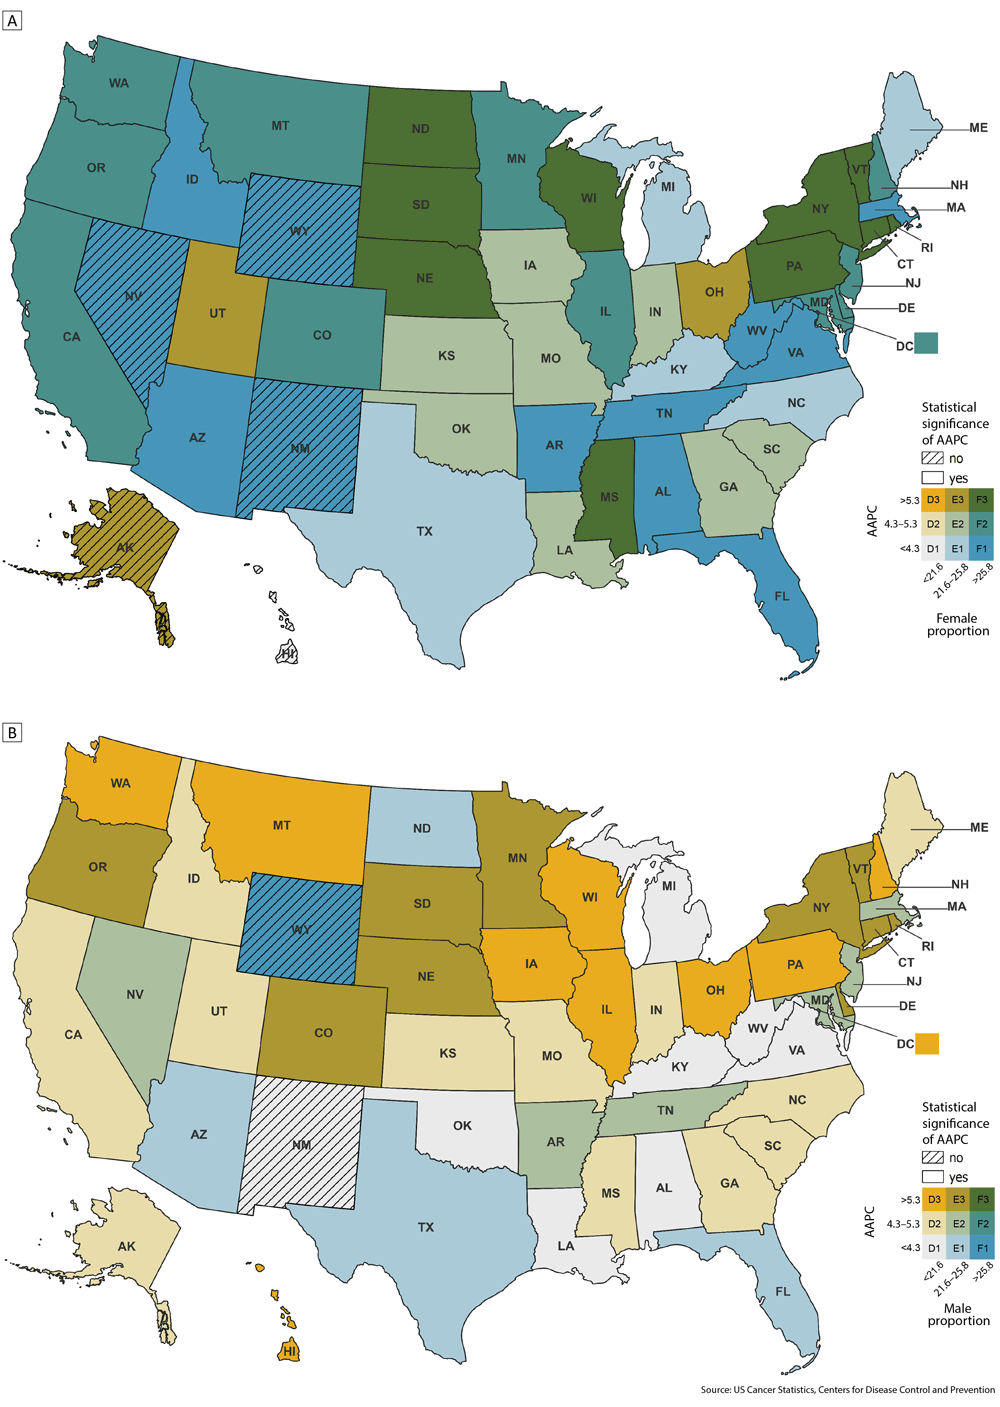 2010–2019 US state-level proportion of lung cancers diagnosed at localized-only stage with AAPC for female adults (Map A) and male adults (Map B). Proportions and AAPC range from lowest, D1, to highest, F3. Source: US Cancer Statistics, Centers for Disease Control and Prevention (10).